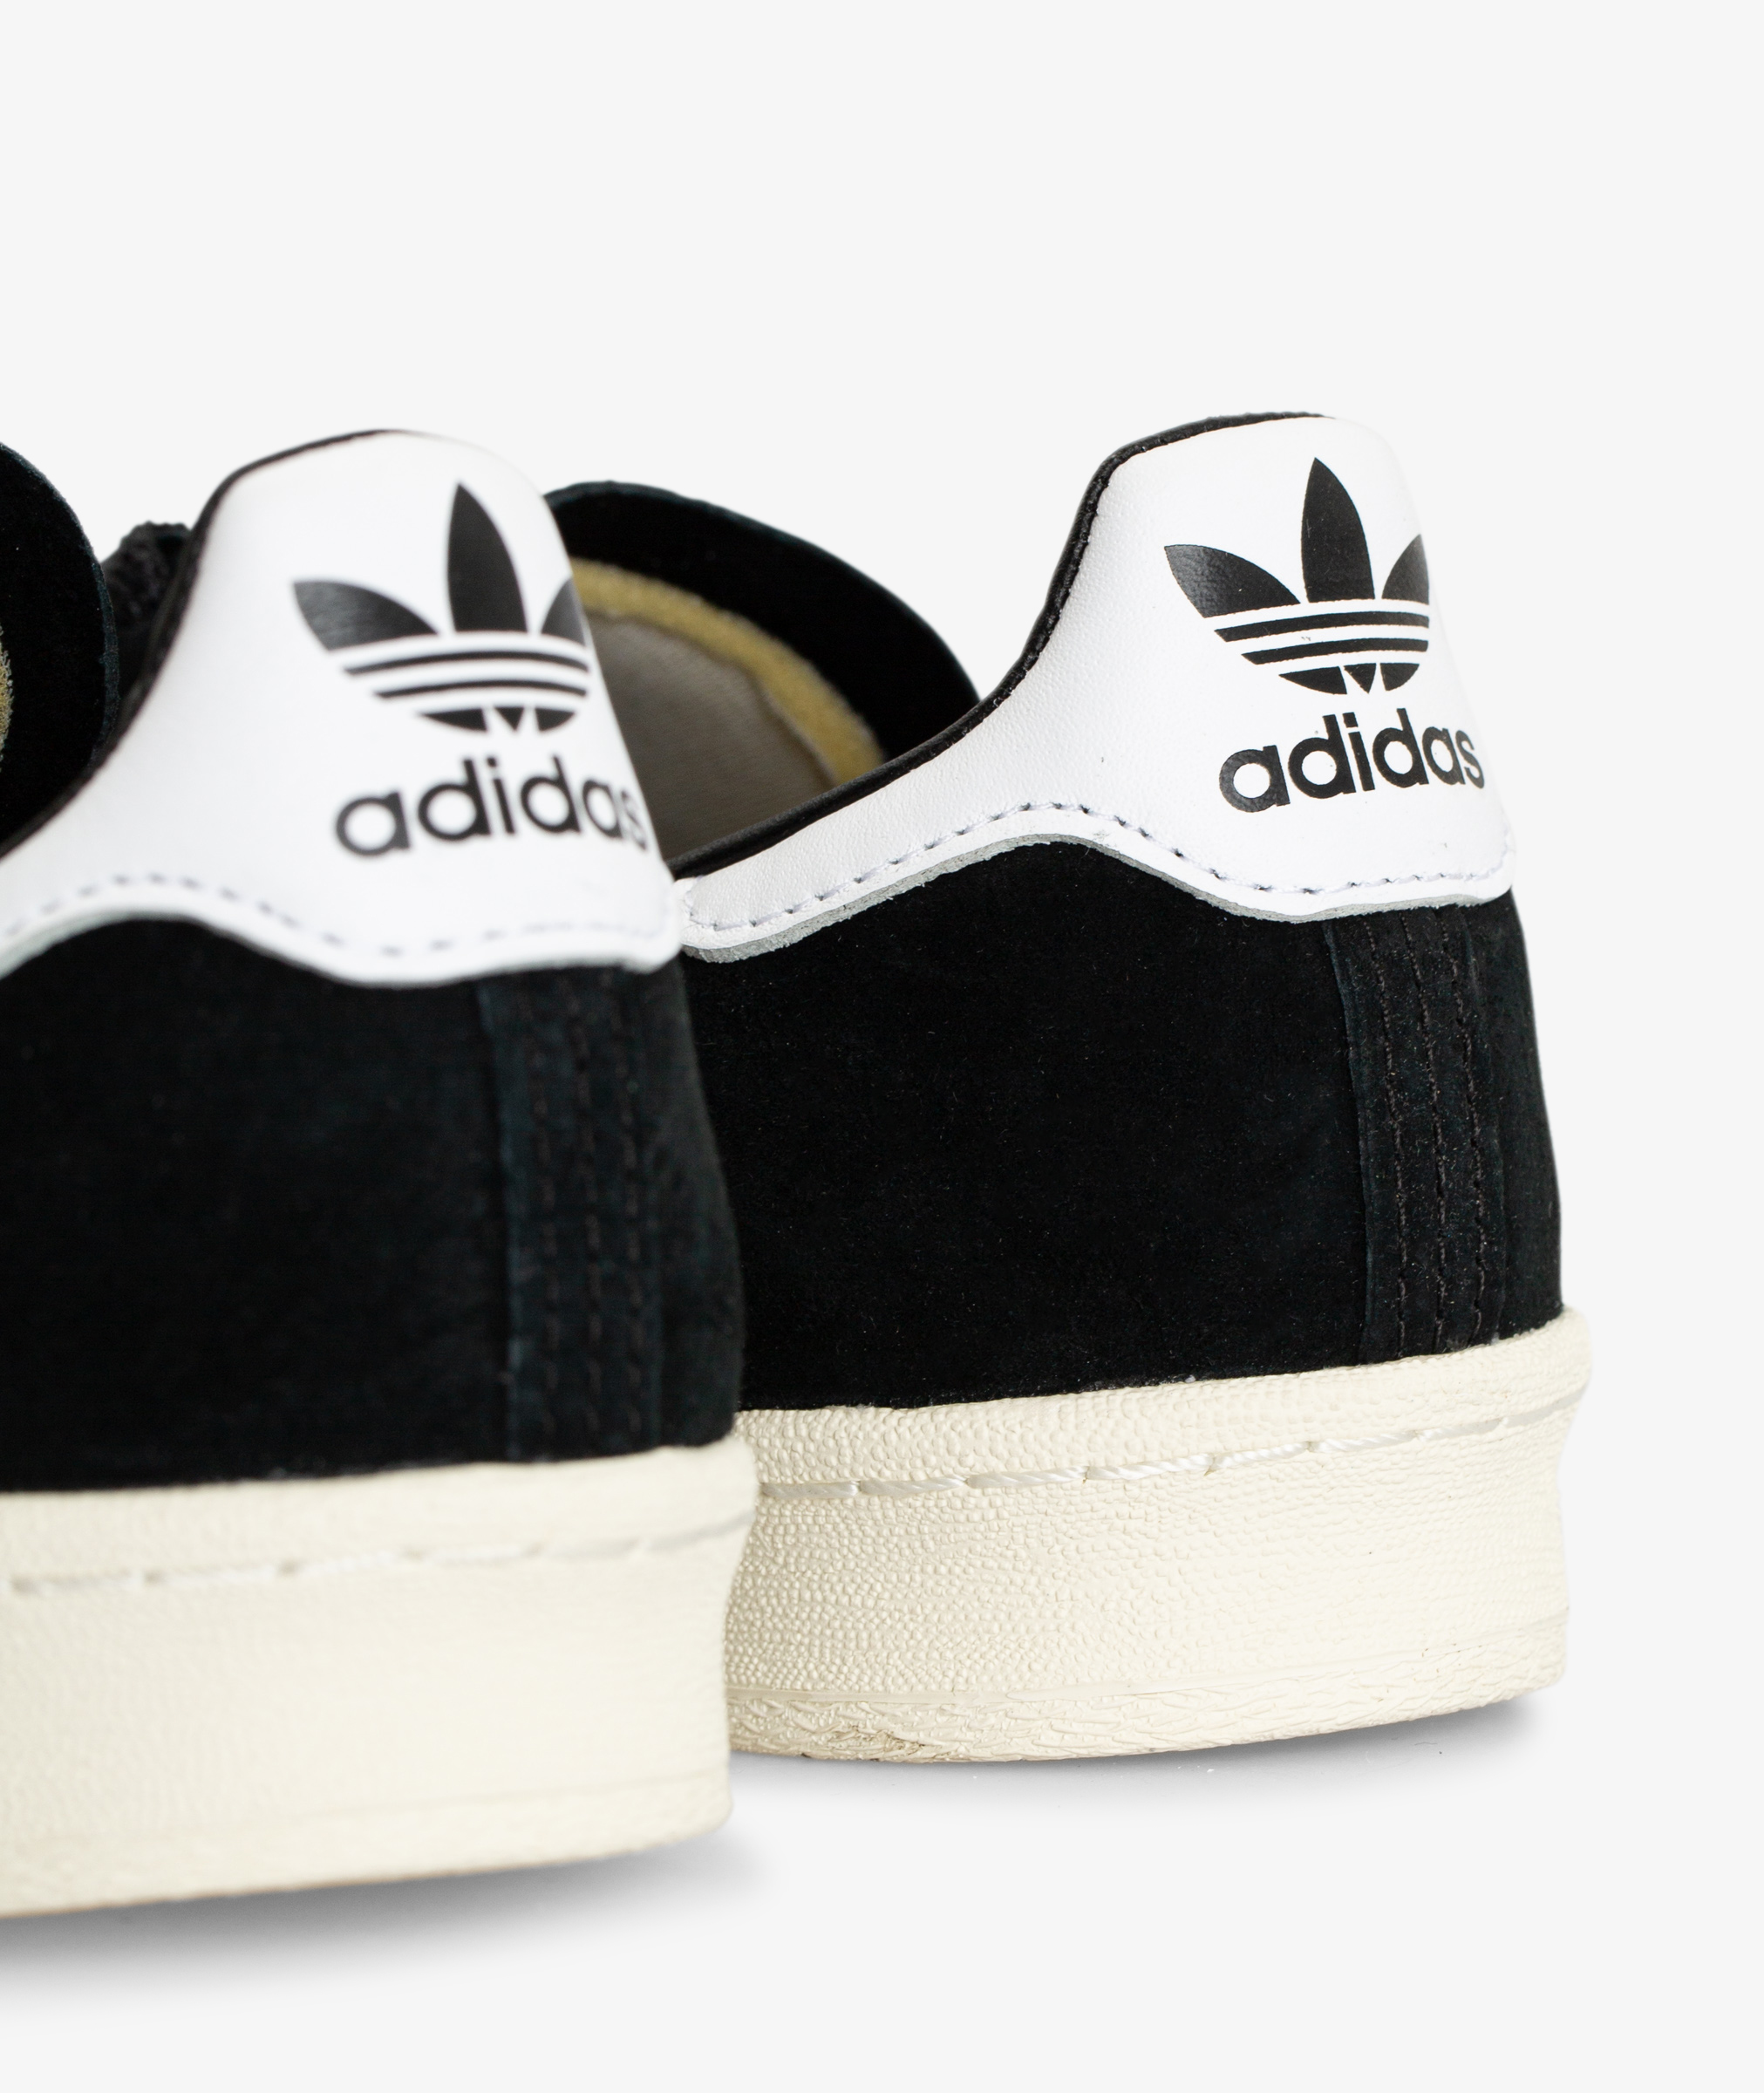 Norse Store | Shipping Worldwide - Sneakers - adidas Originals